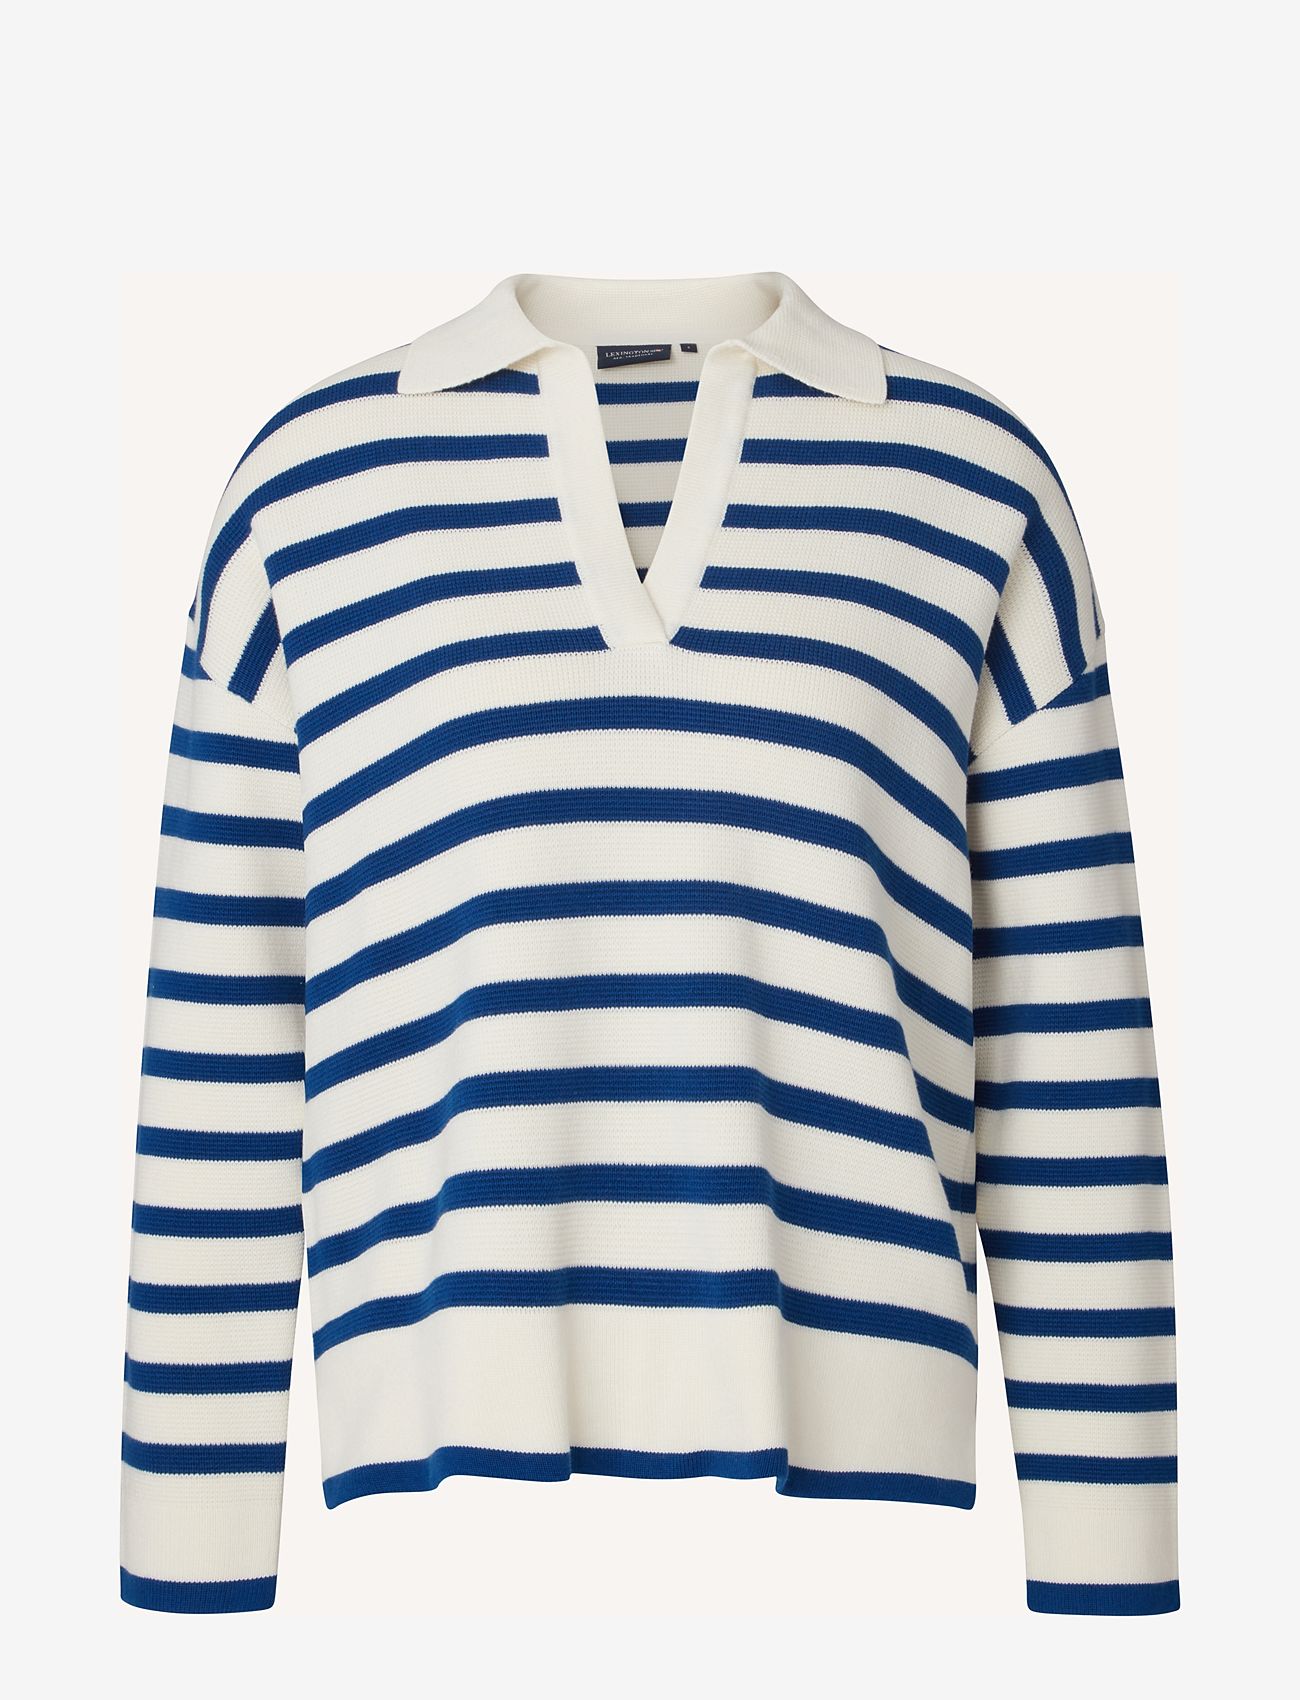 Lexington Clothing - Peyton Full Milano Knitted Sweater - jumpers - blue/white stripe - 0